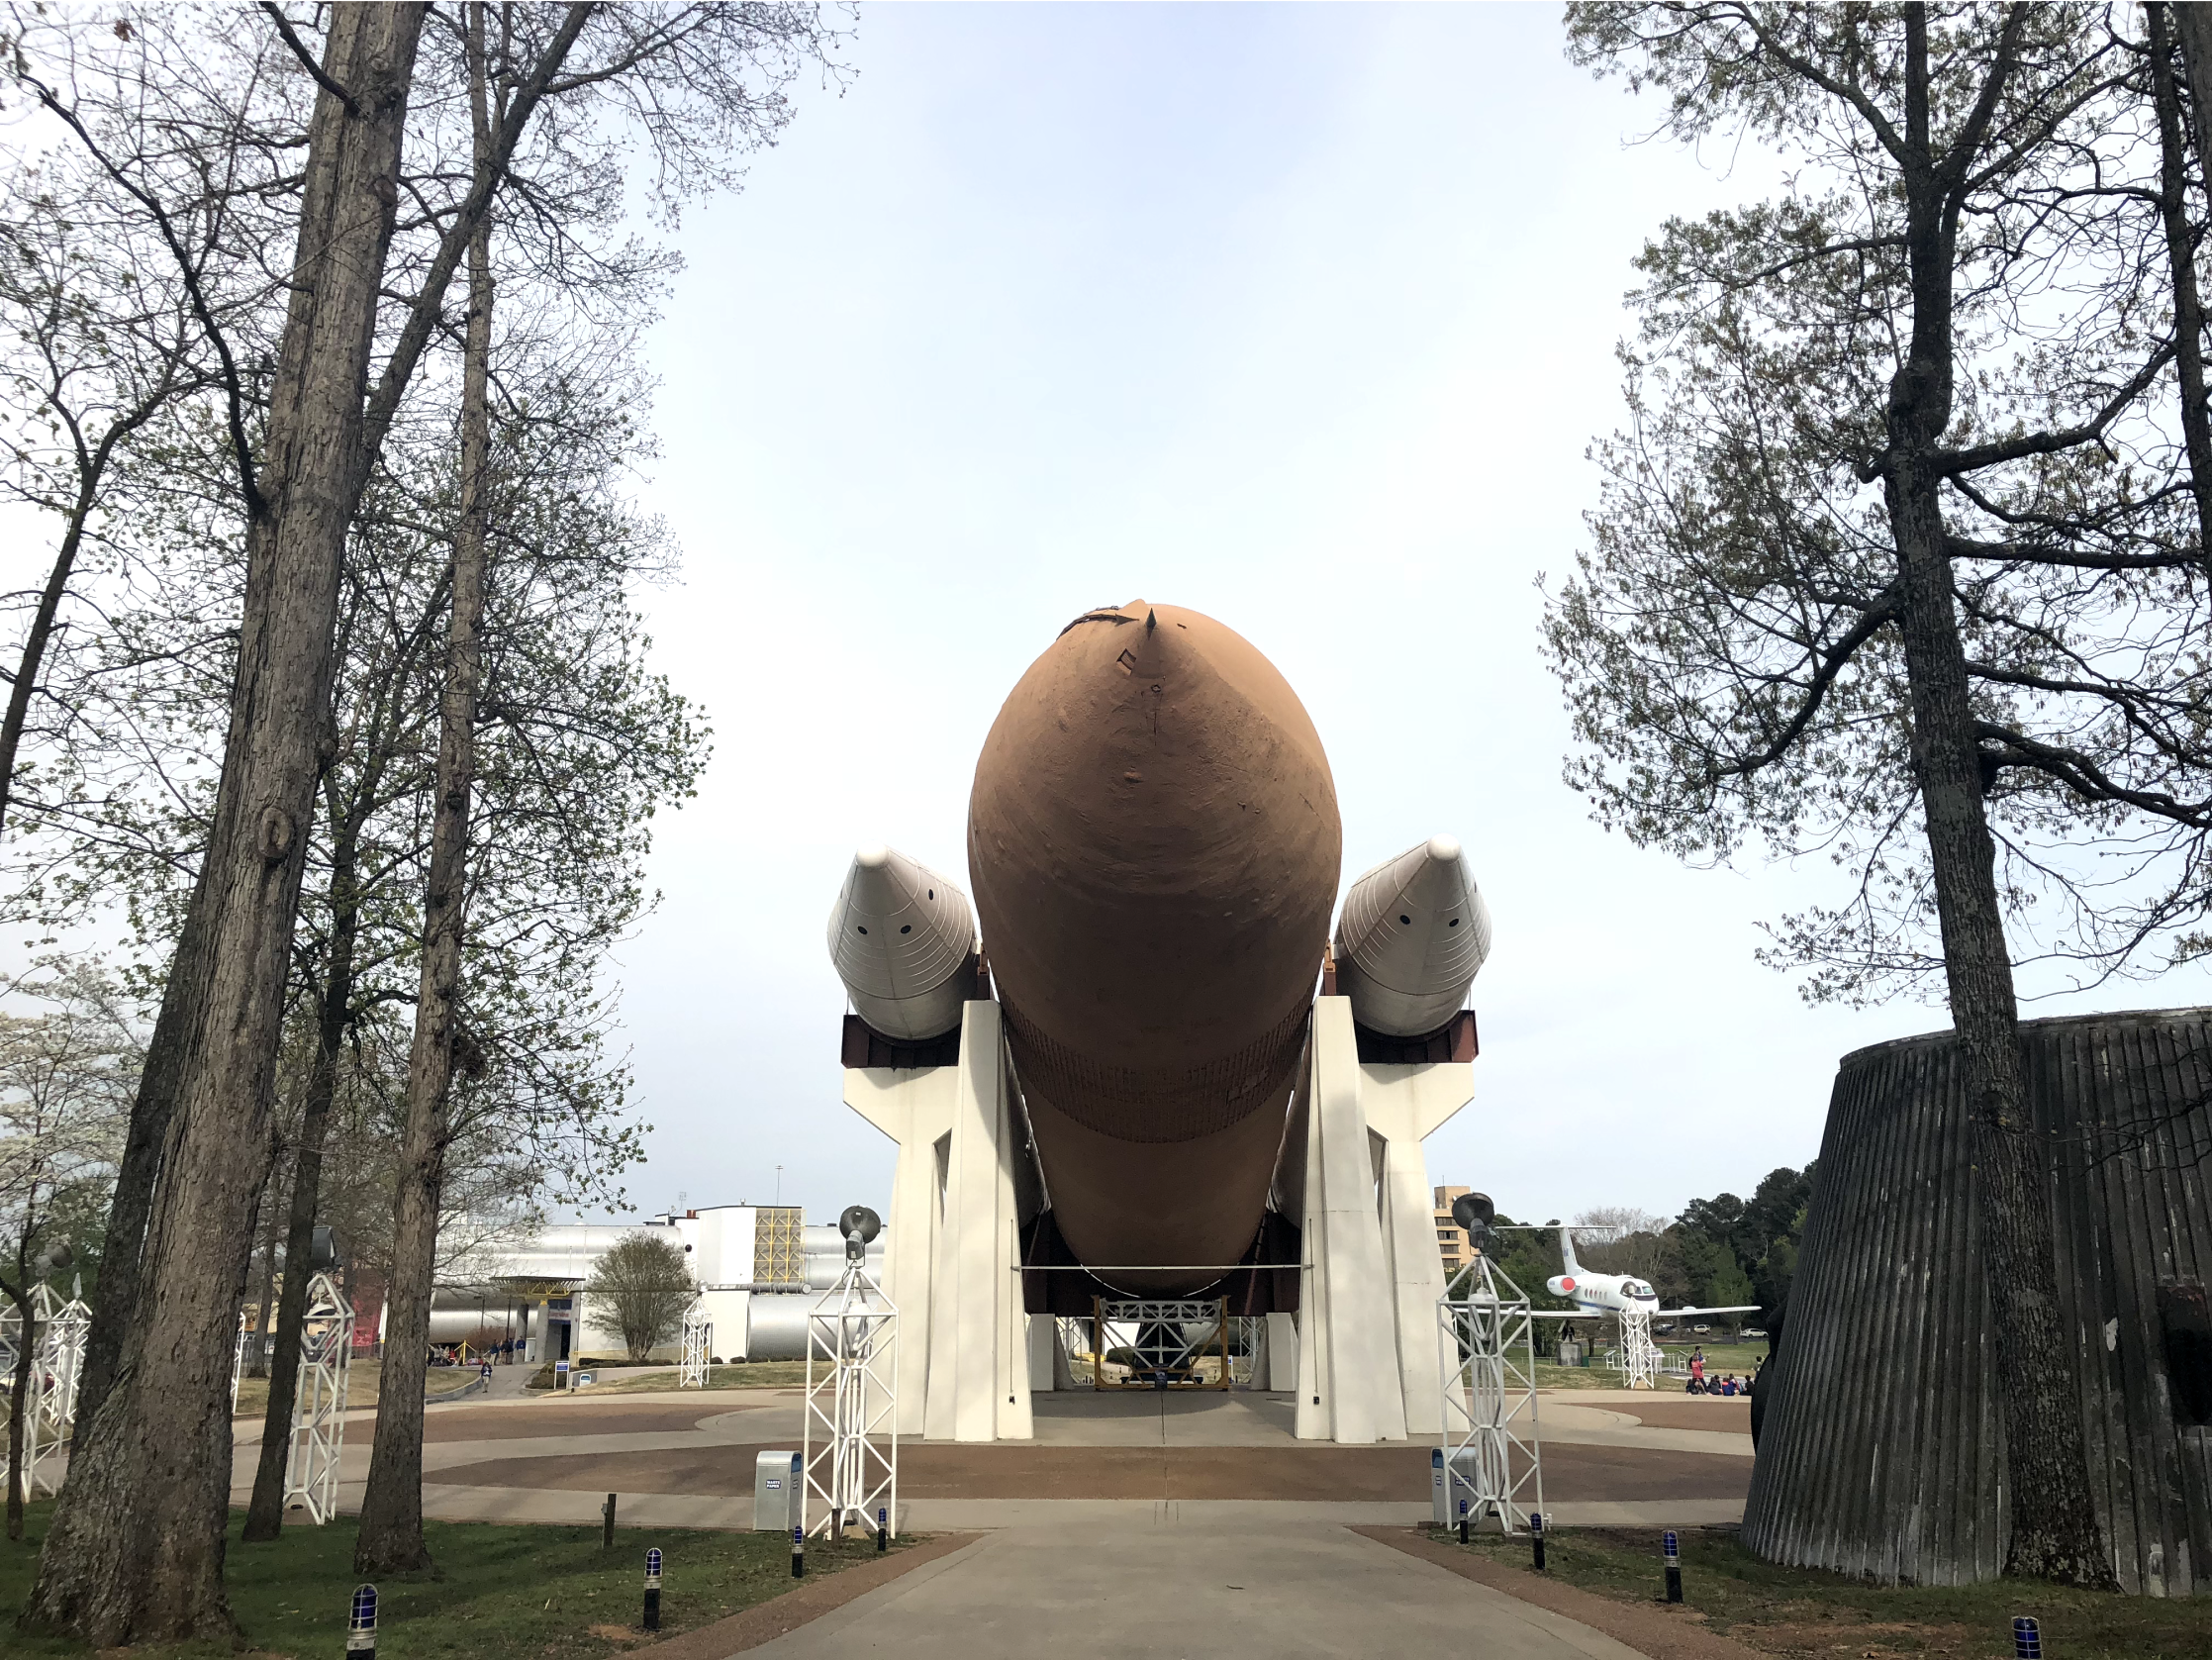 On display at the U.S. Space & Rocket Center, an External Tank (ET) test article and 2 Solid Rocket Booster (SRB) models form a complete Space Shuttle stack, like those used during Shuttle missions. (Visit to Marshall Space Flight Center, Huntsville, Alabama)